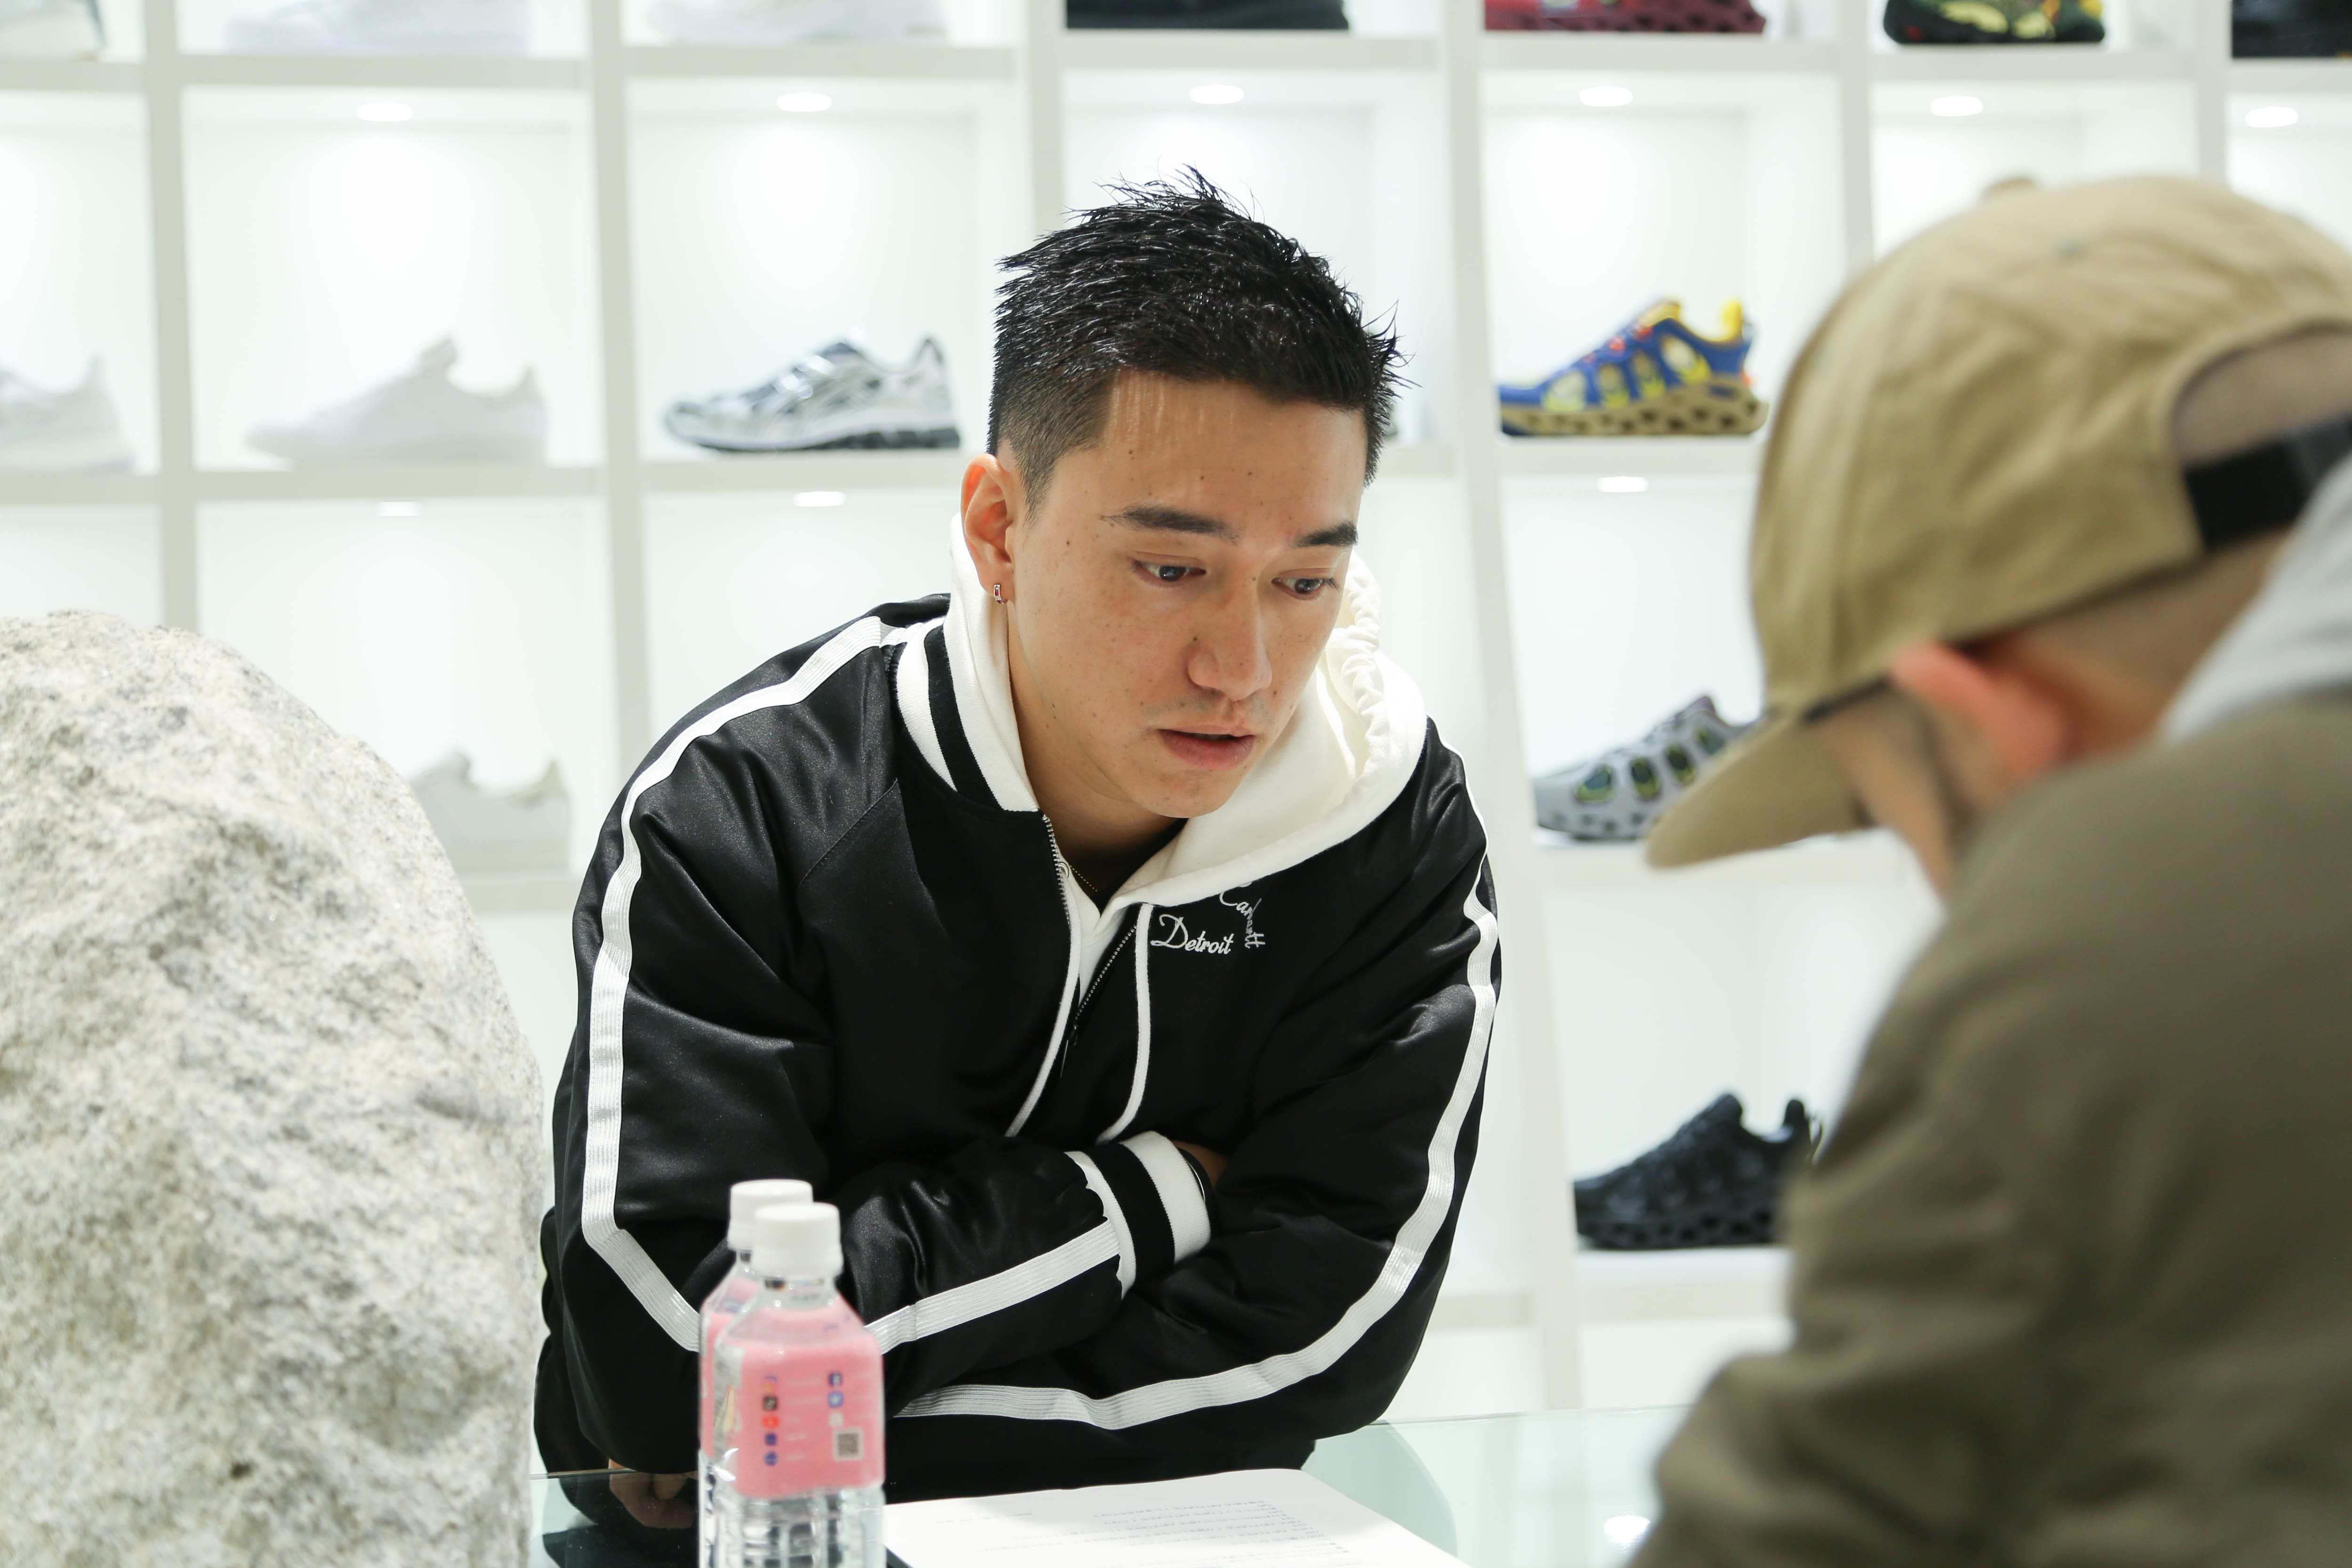 "NIKE AF1 INTERVIEW EIGHTH"